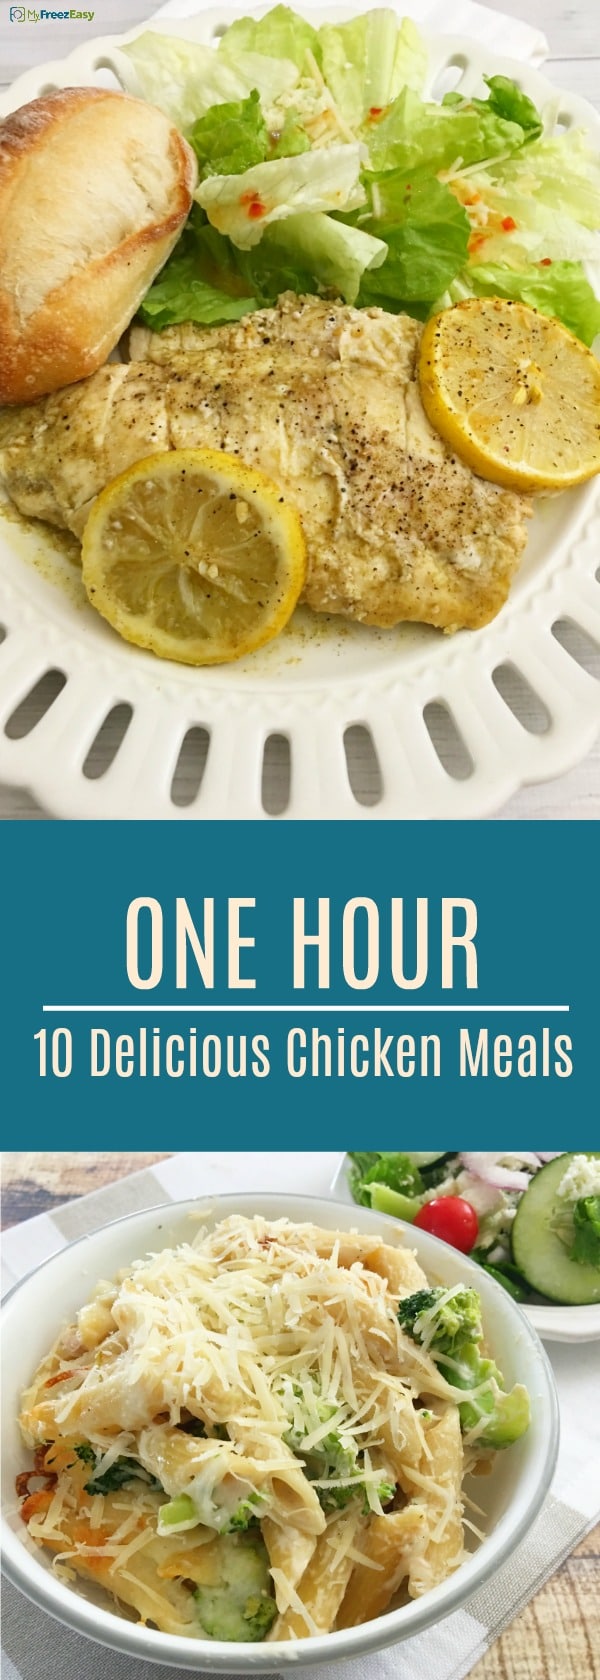 10 Delicious Chicken Meals in One Hour